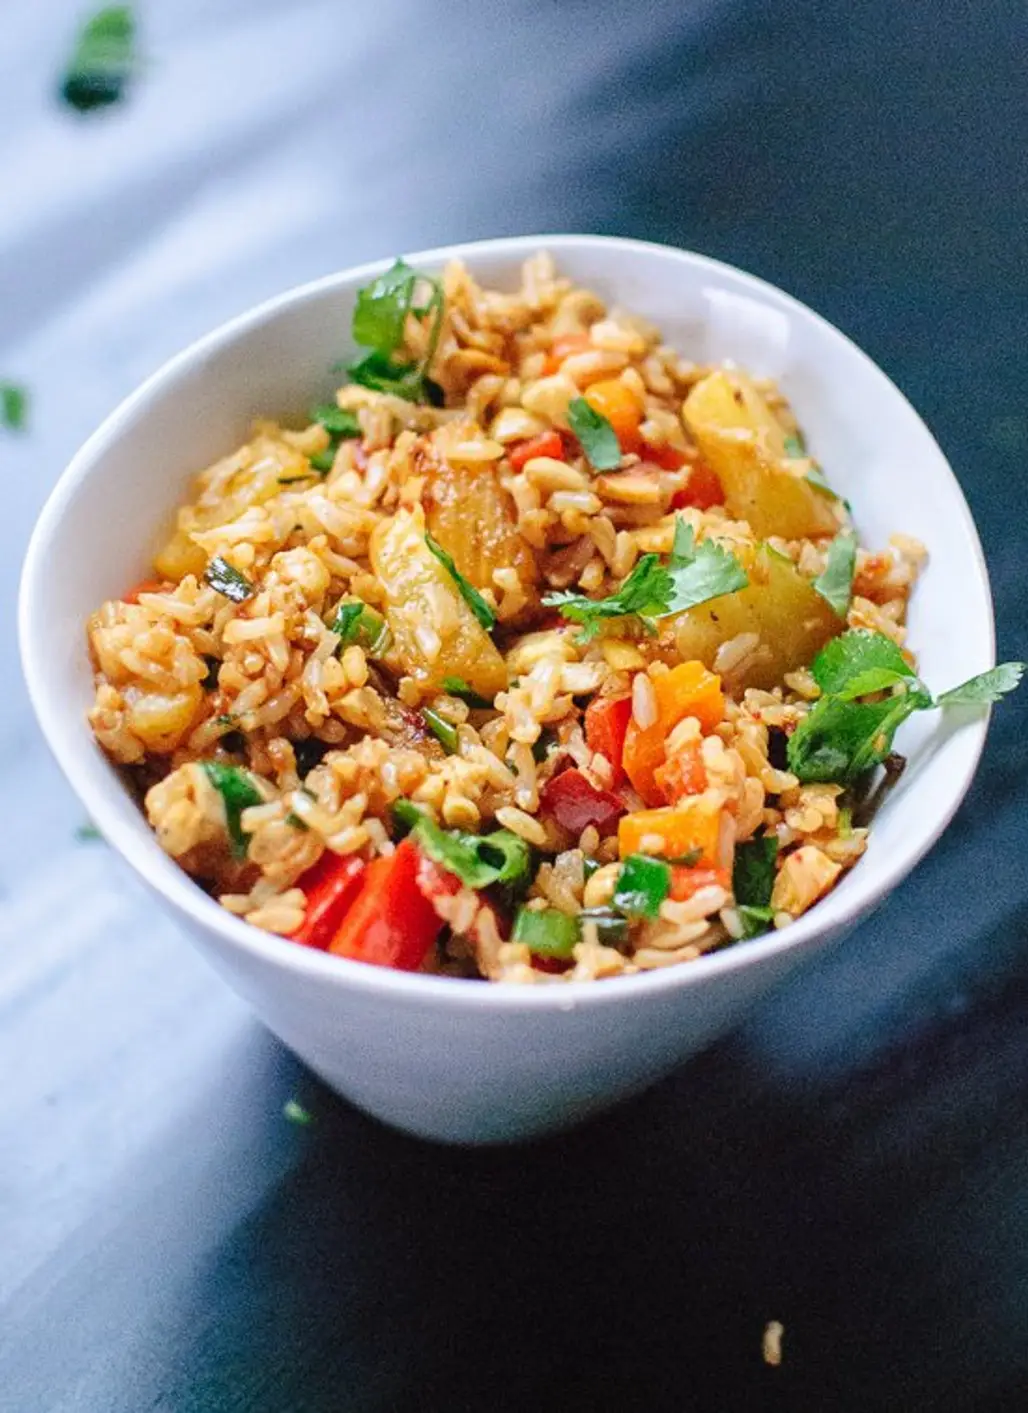 Cook “Fried” Rice with Lots of Vegetables